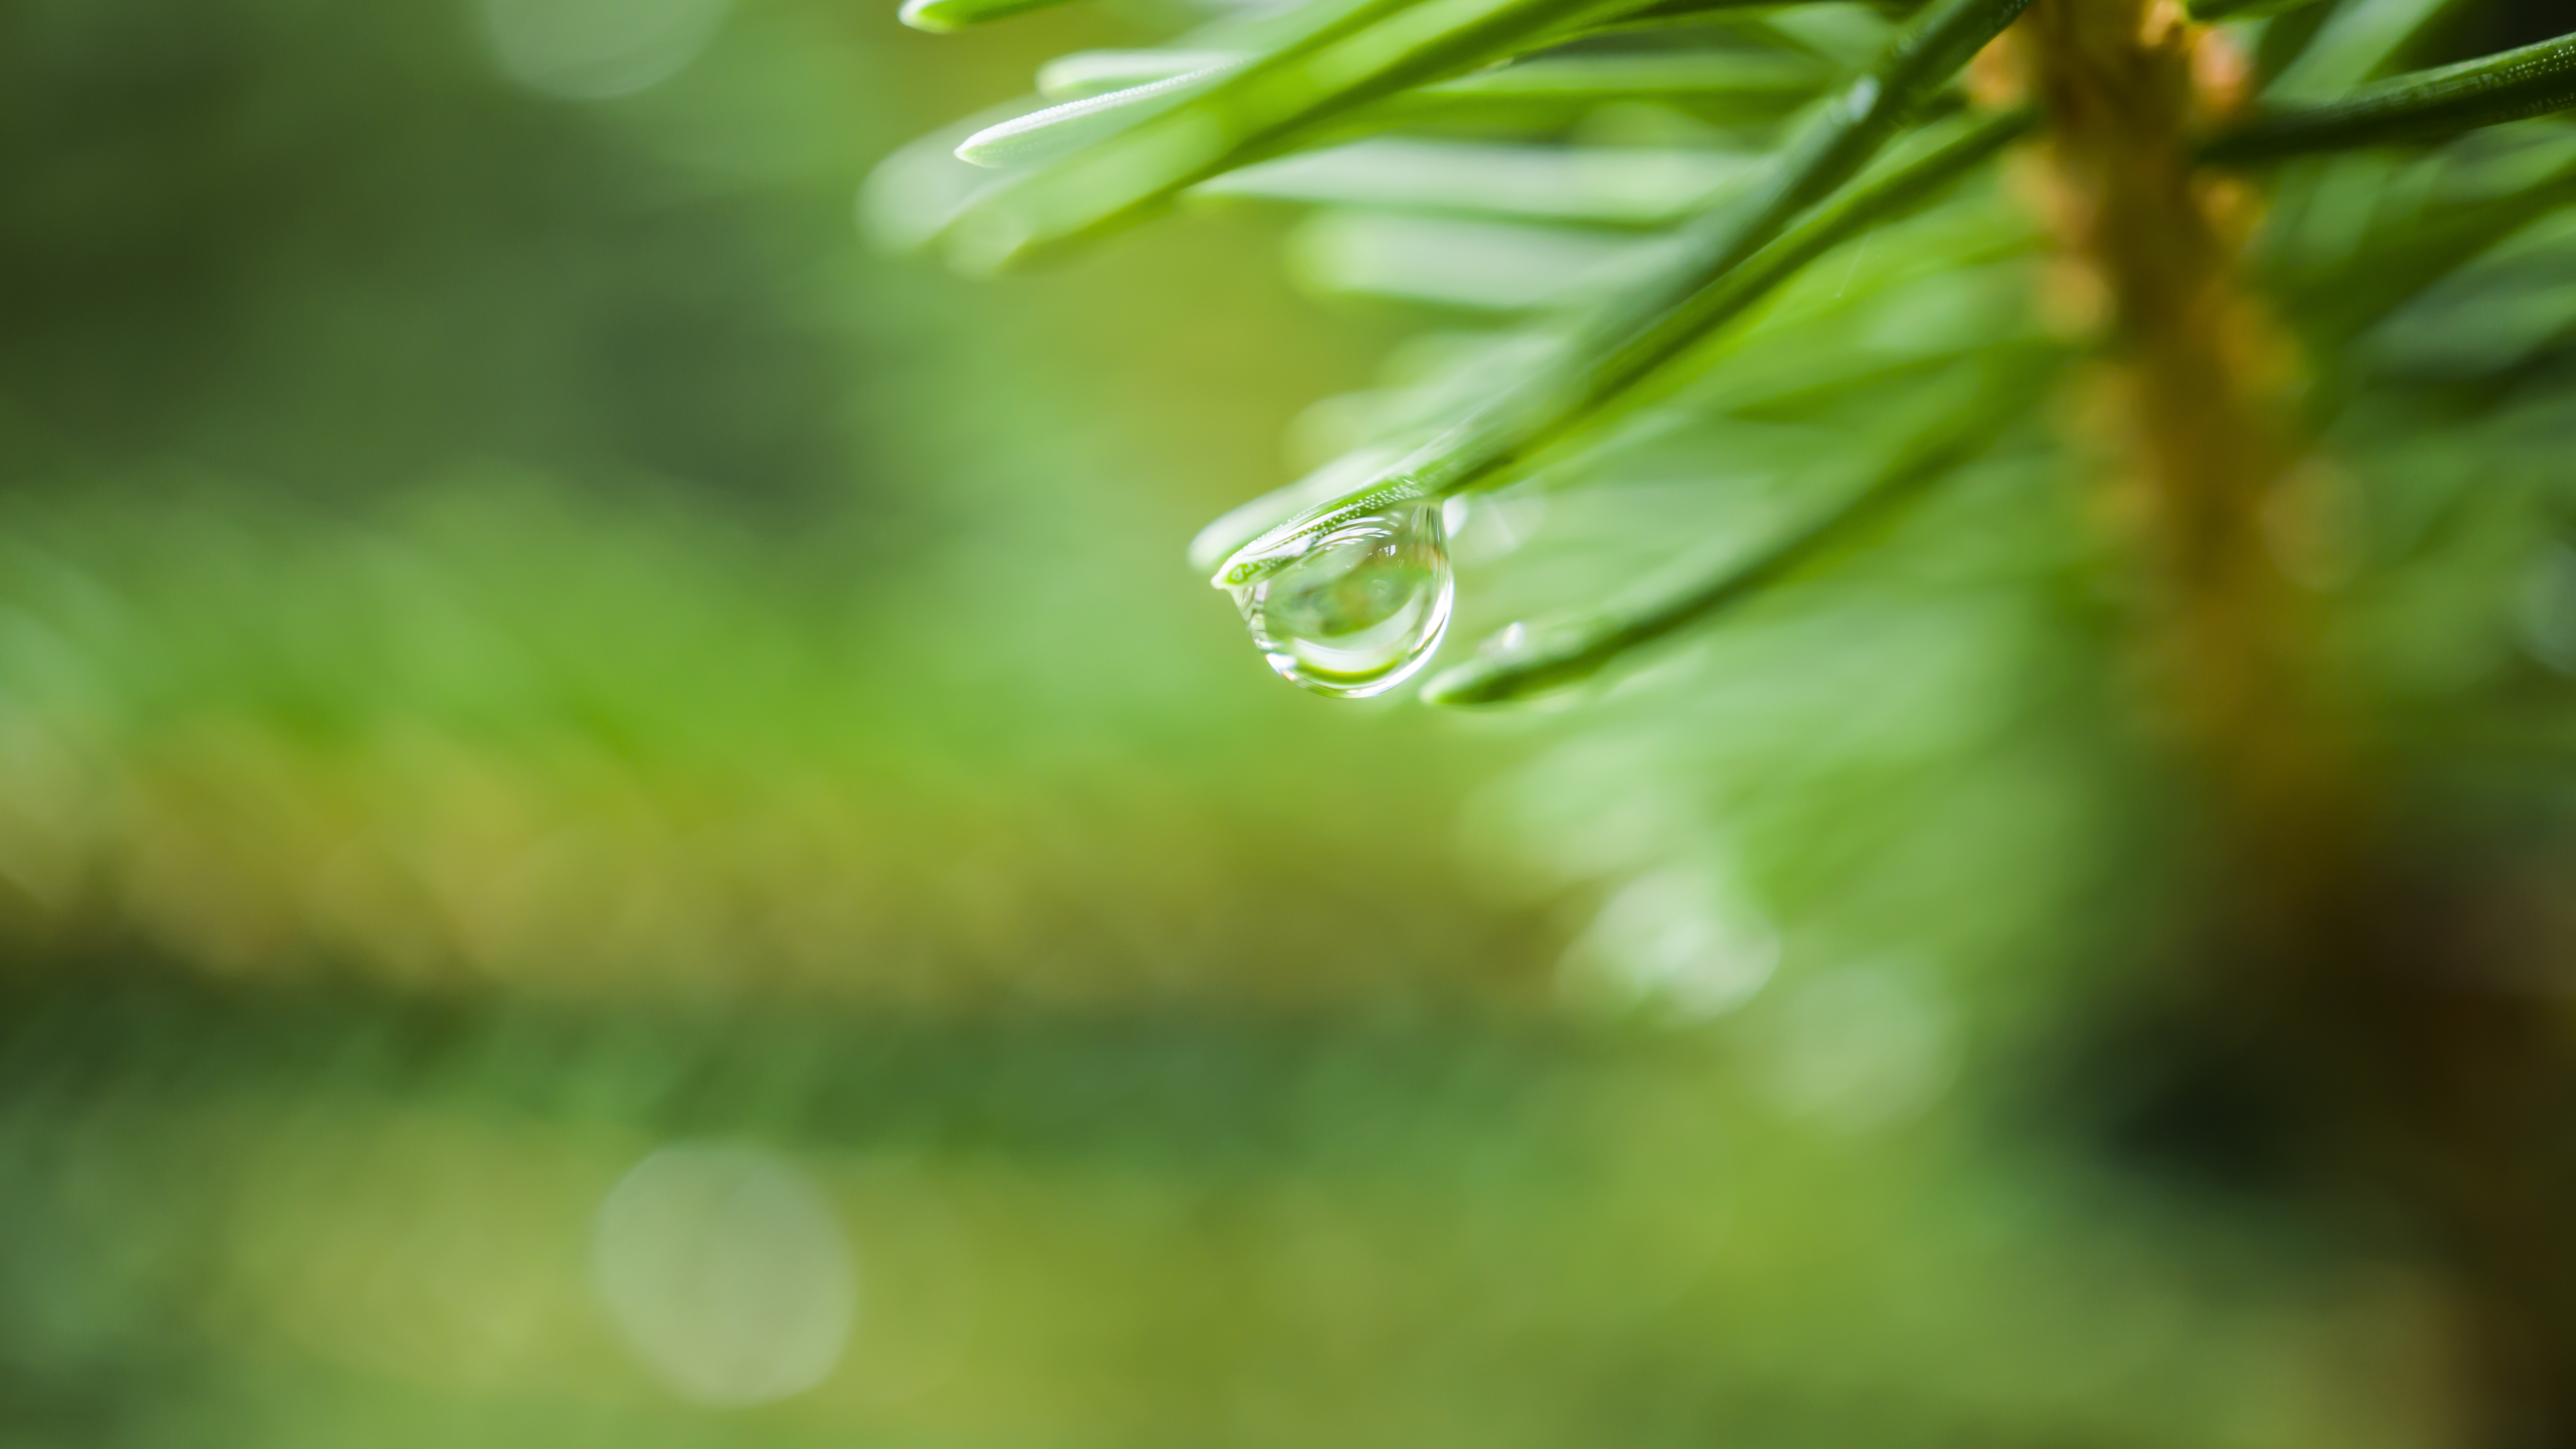 General 6000x3376 nature pine trees bokeh water drops green macro plants photography depth of field blurry background blurred leaves